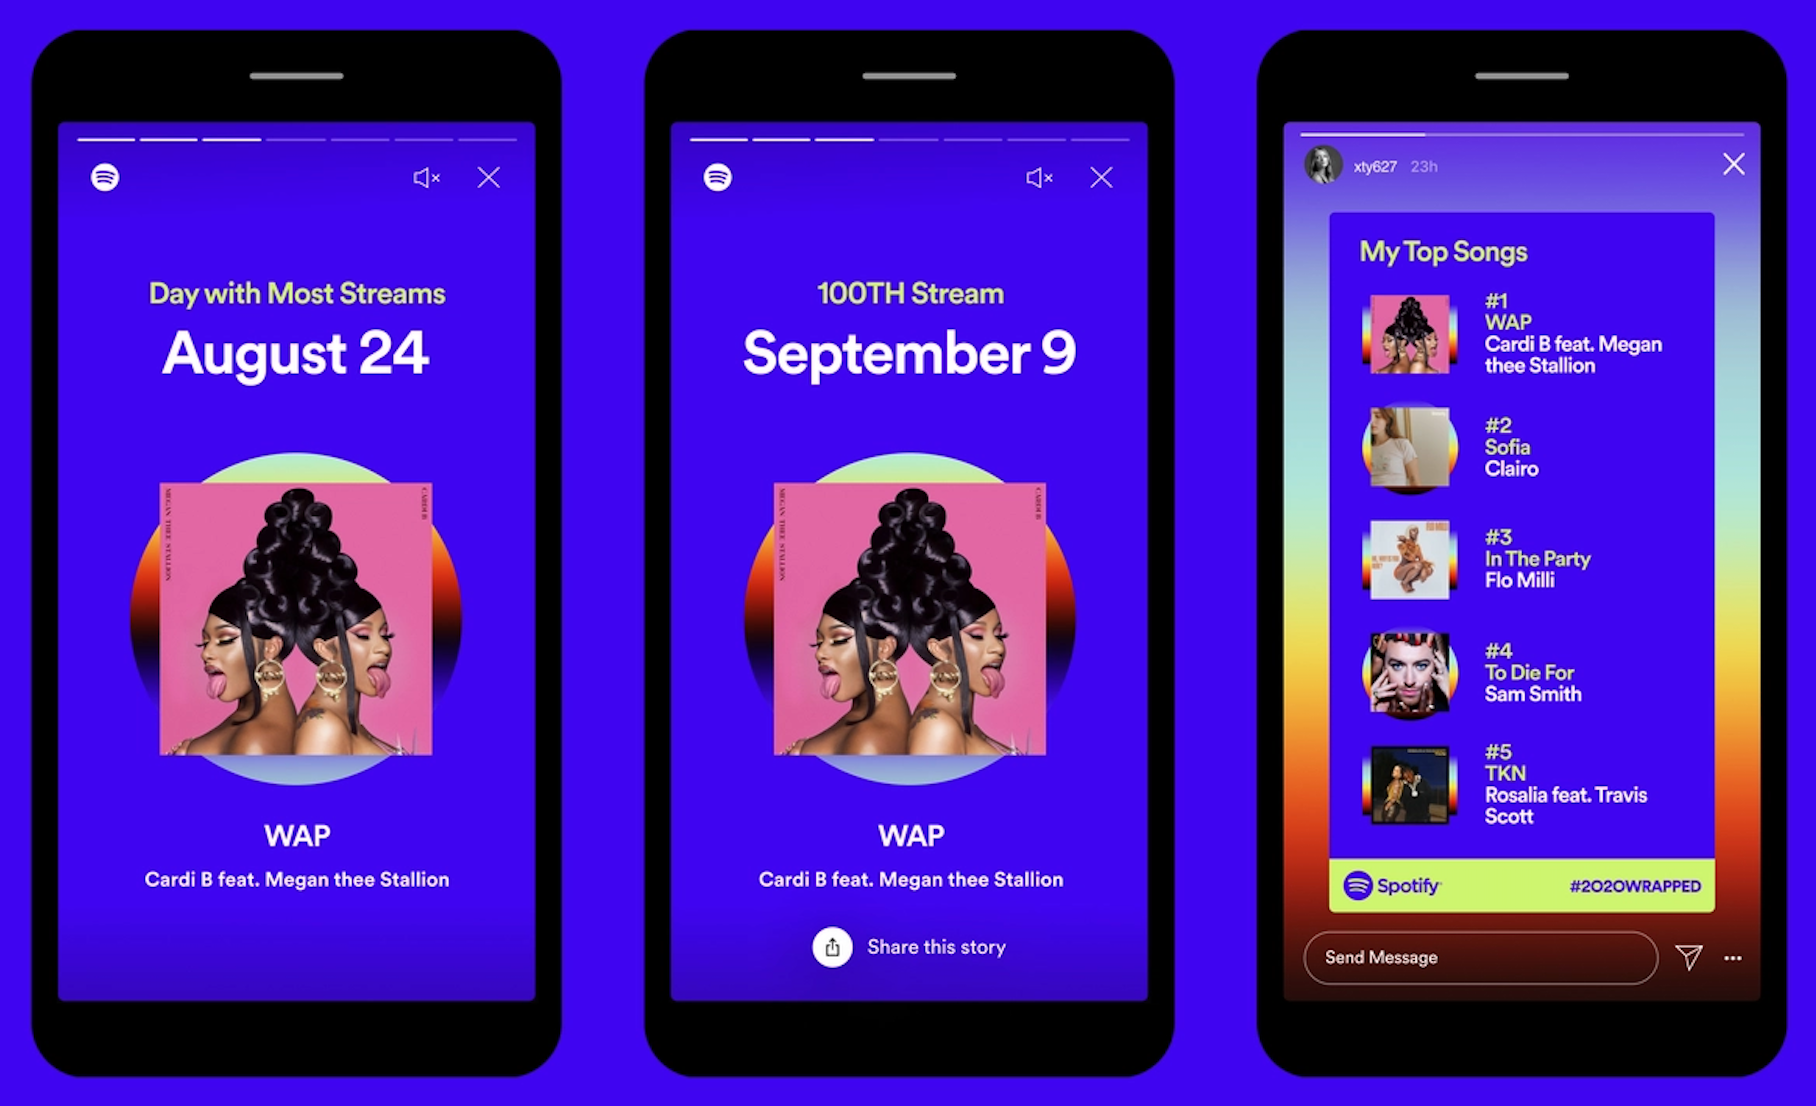 Spotify launches 2020 Wrapped with new features. Here's what you'll get